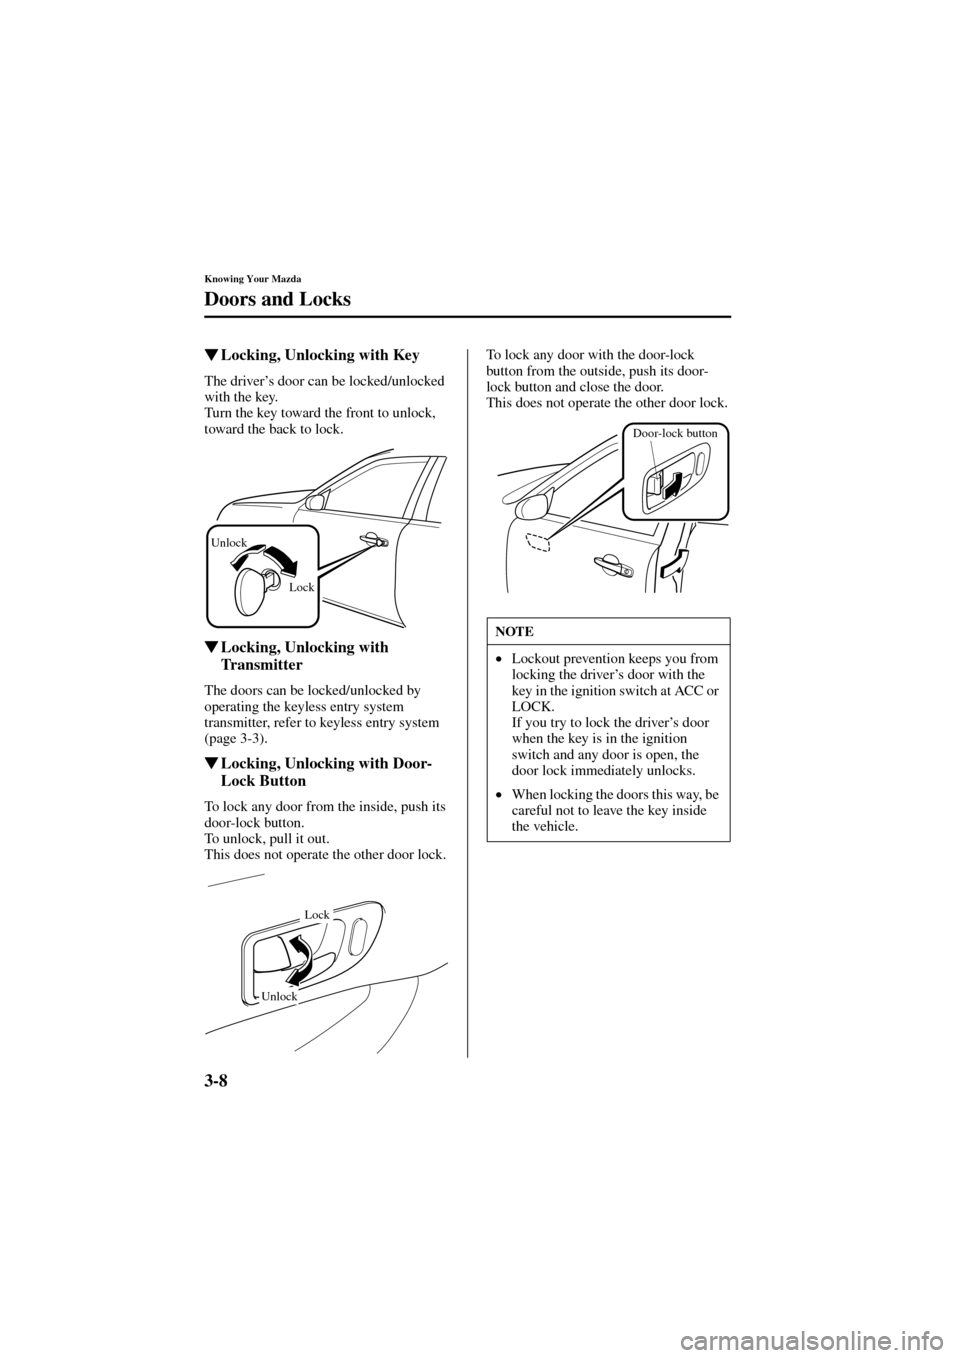 MAZDA MODEL 6 2004  Owners Manual (in English) 3-8
Knowing Your Mazda
Doors and Locks
Form No. 8R29-EA-02I
Locking, Unlocking with Key
The driver’s door can be locked/unlocked 
with the key.
Turn the key toward the front to unlock, 
toward the 